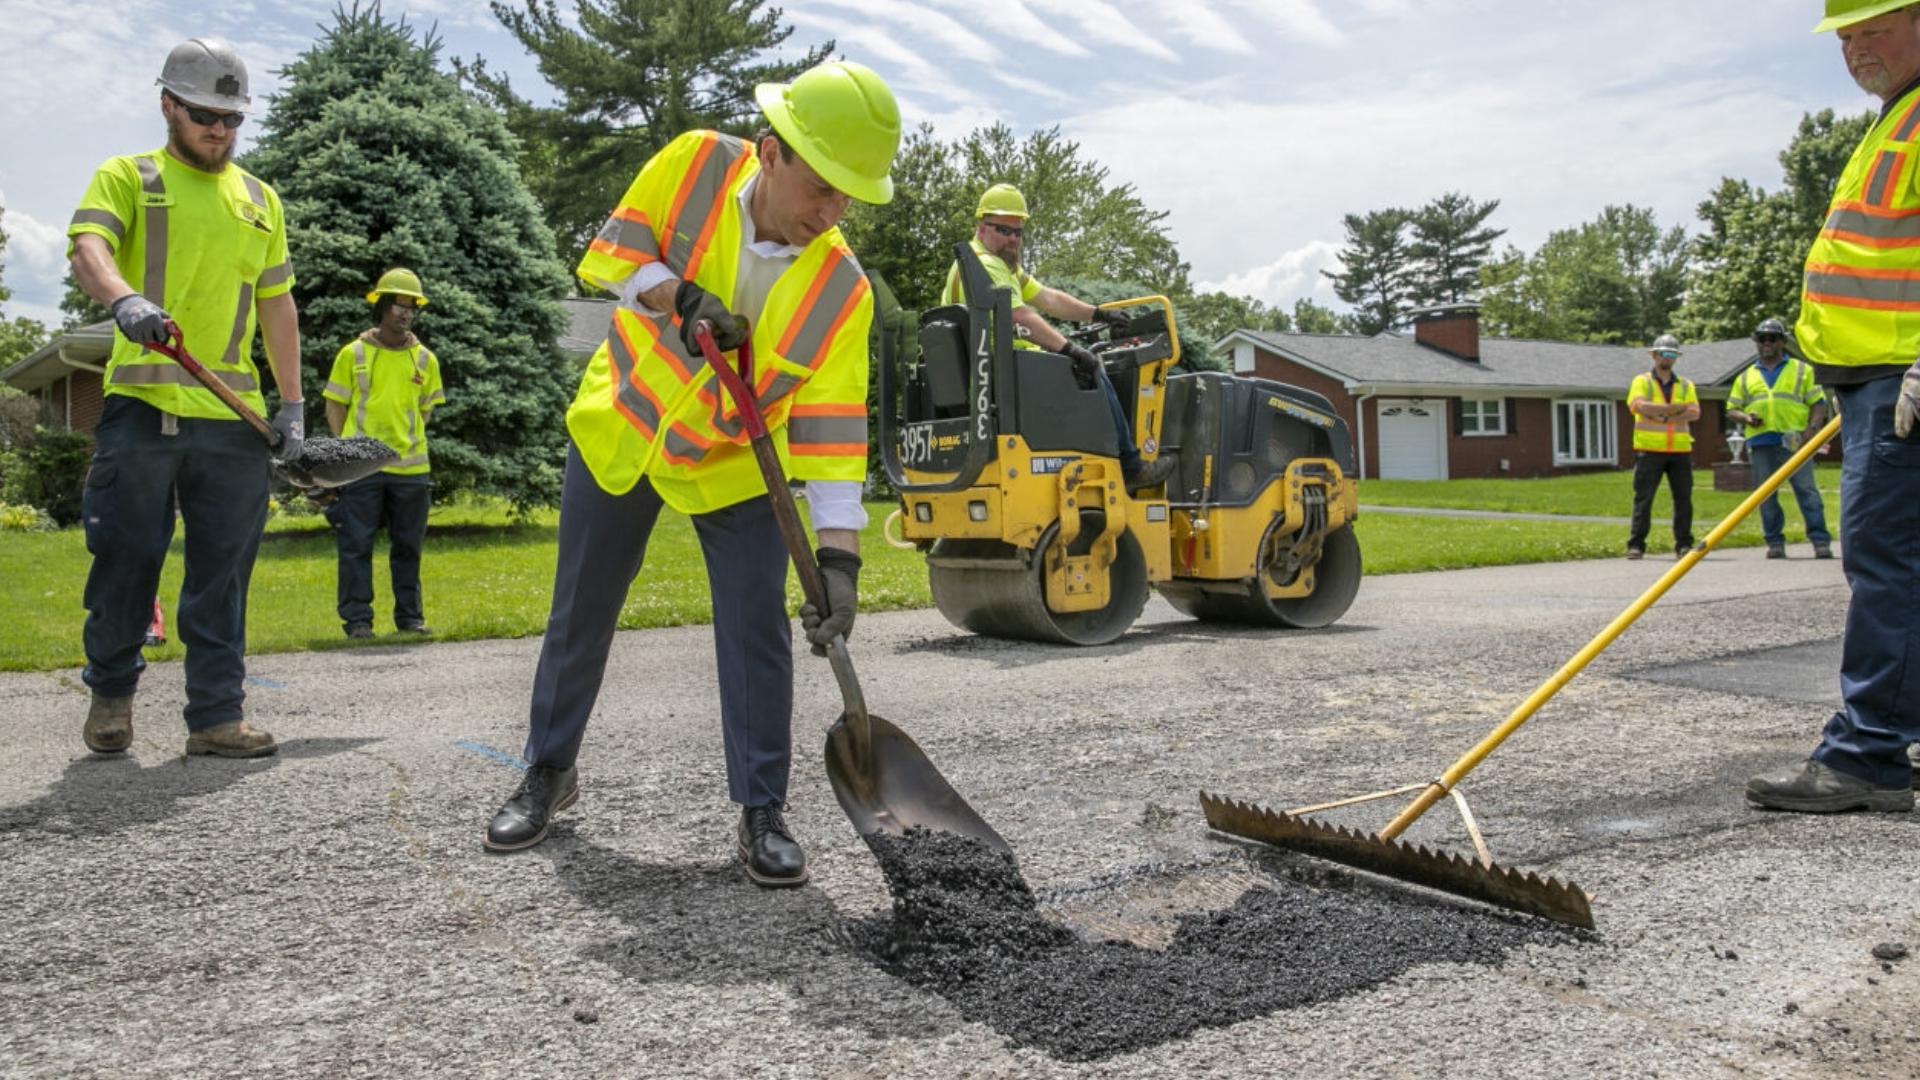 Louisville's Public Works department plugs potholes year-round, but the annual pothole blitz beginning now means it's likely they're working in your neighborhood.